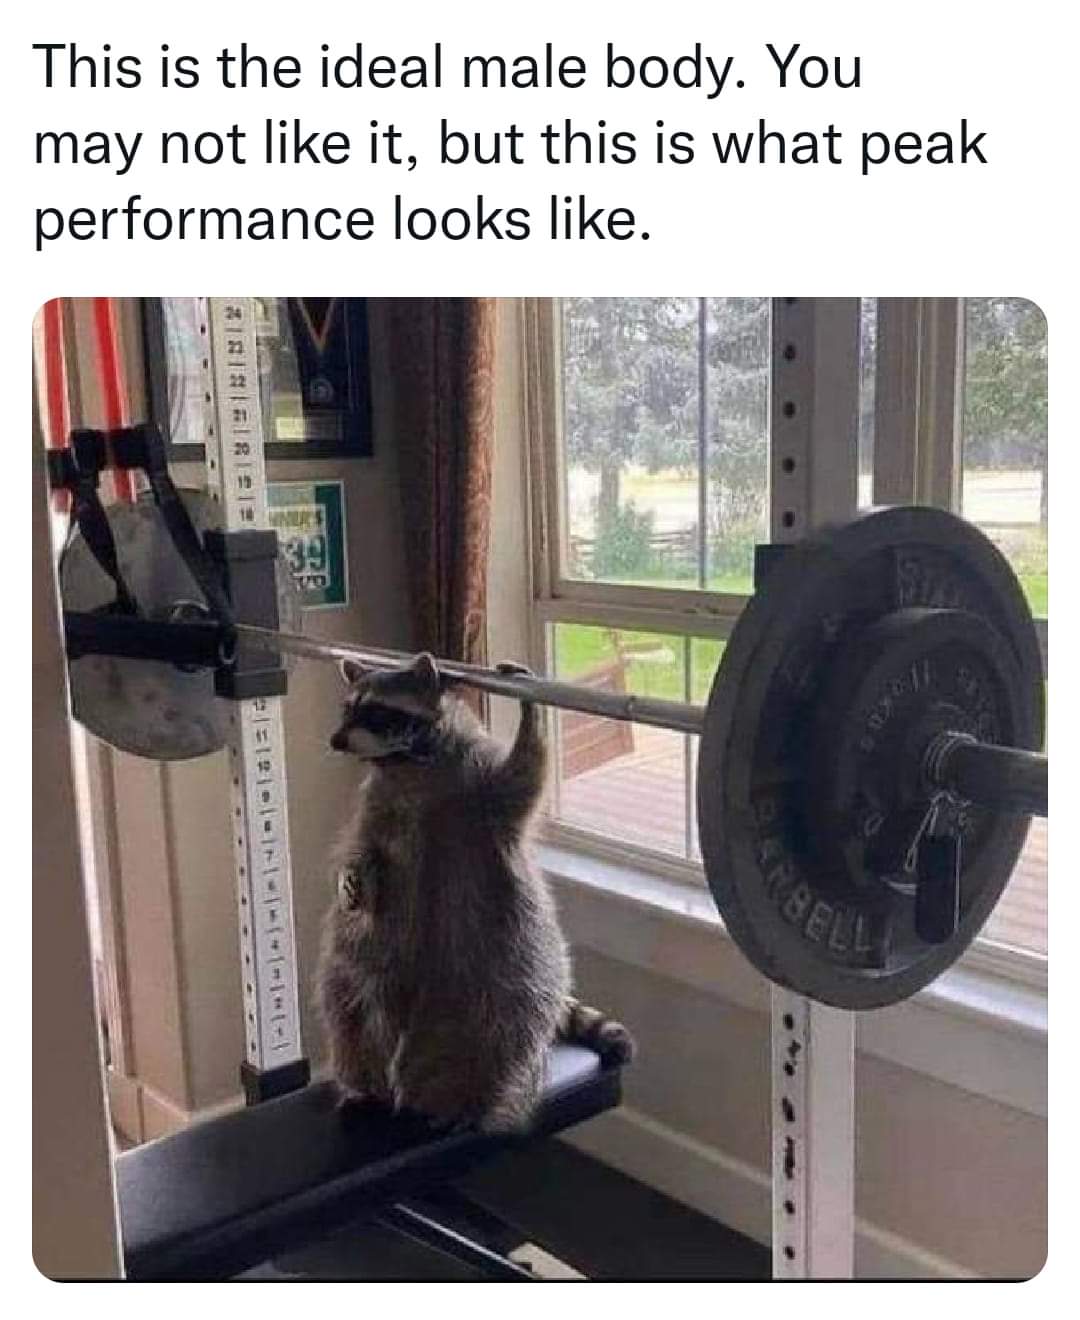 funny raccoon - This is the ideal male body. You may not it, but this is what peak performance looks . 10 Una 89 11 11118121 Bell